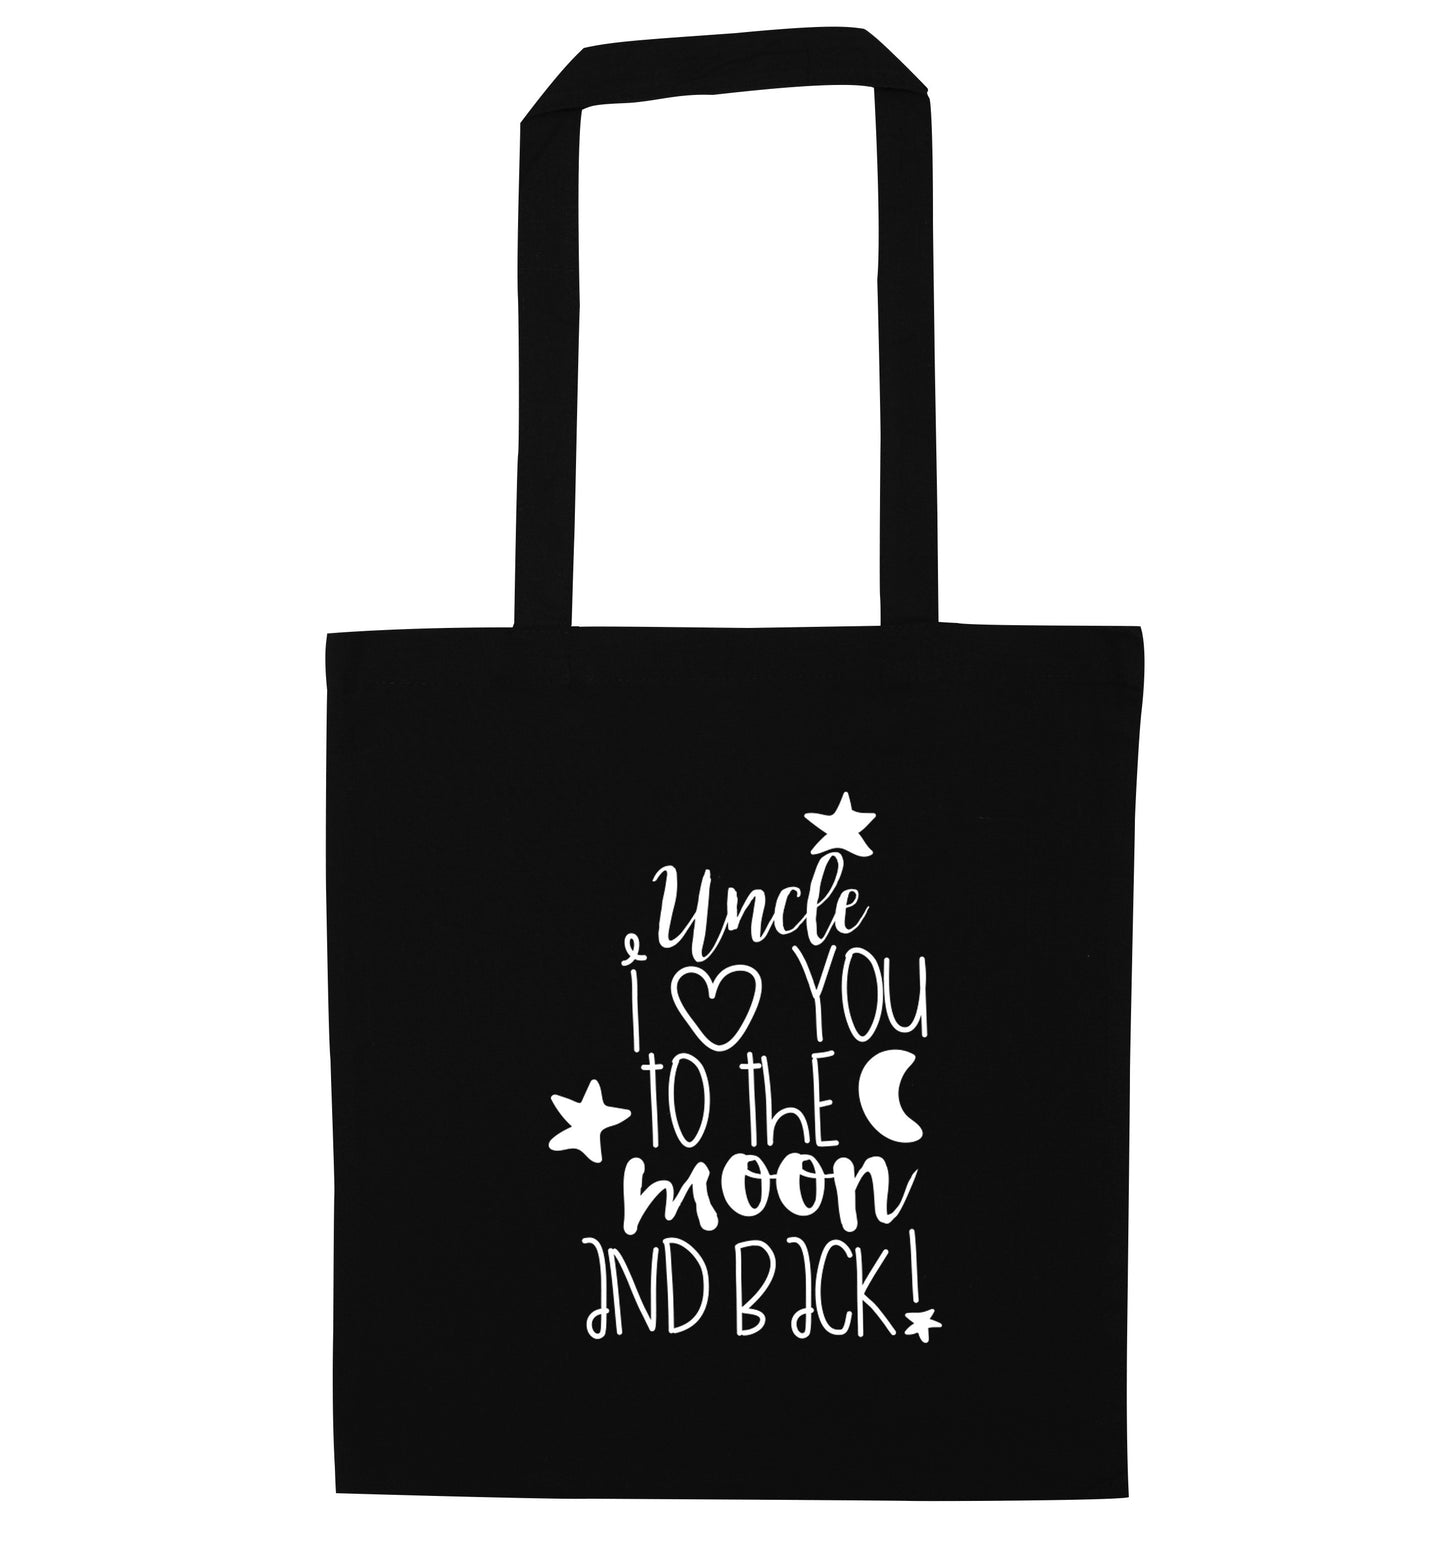 Uncle I love you to the moon and back black tote bag